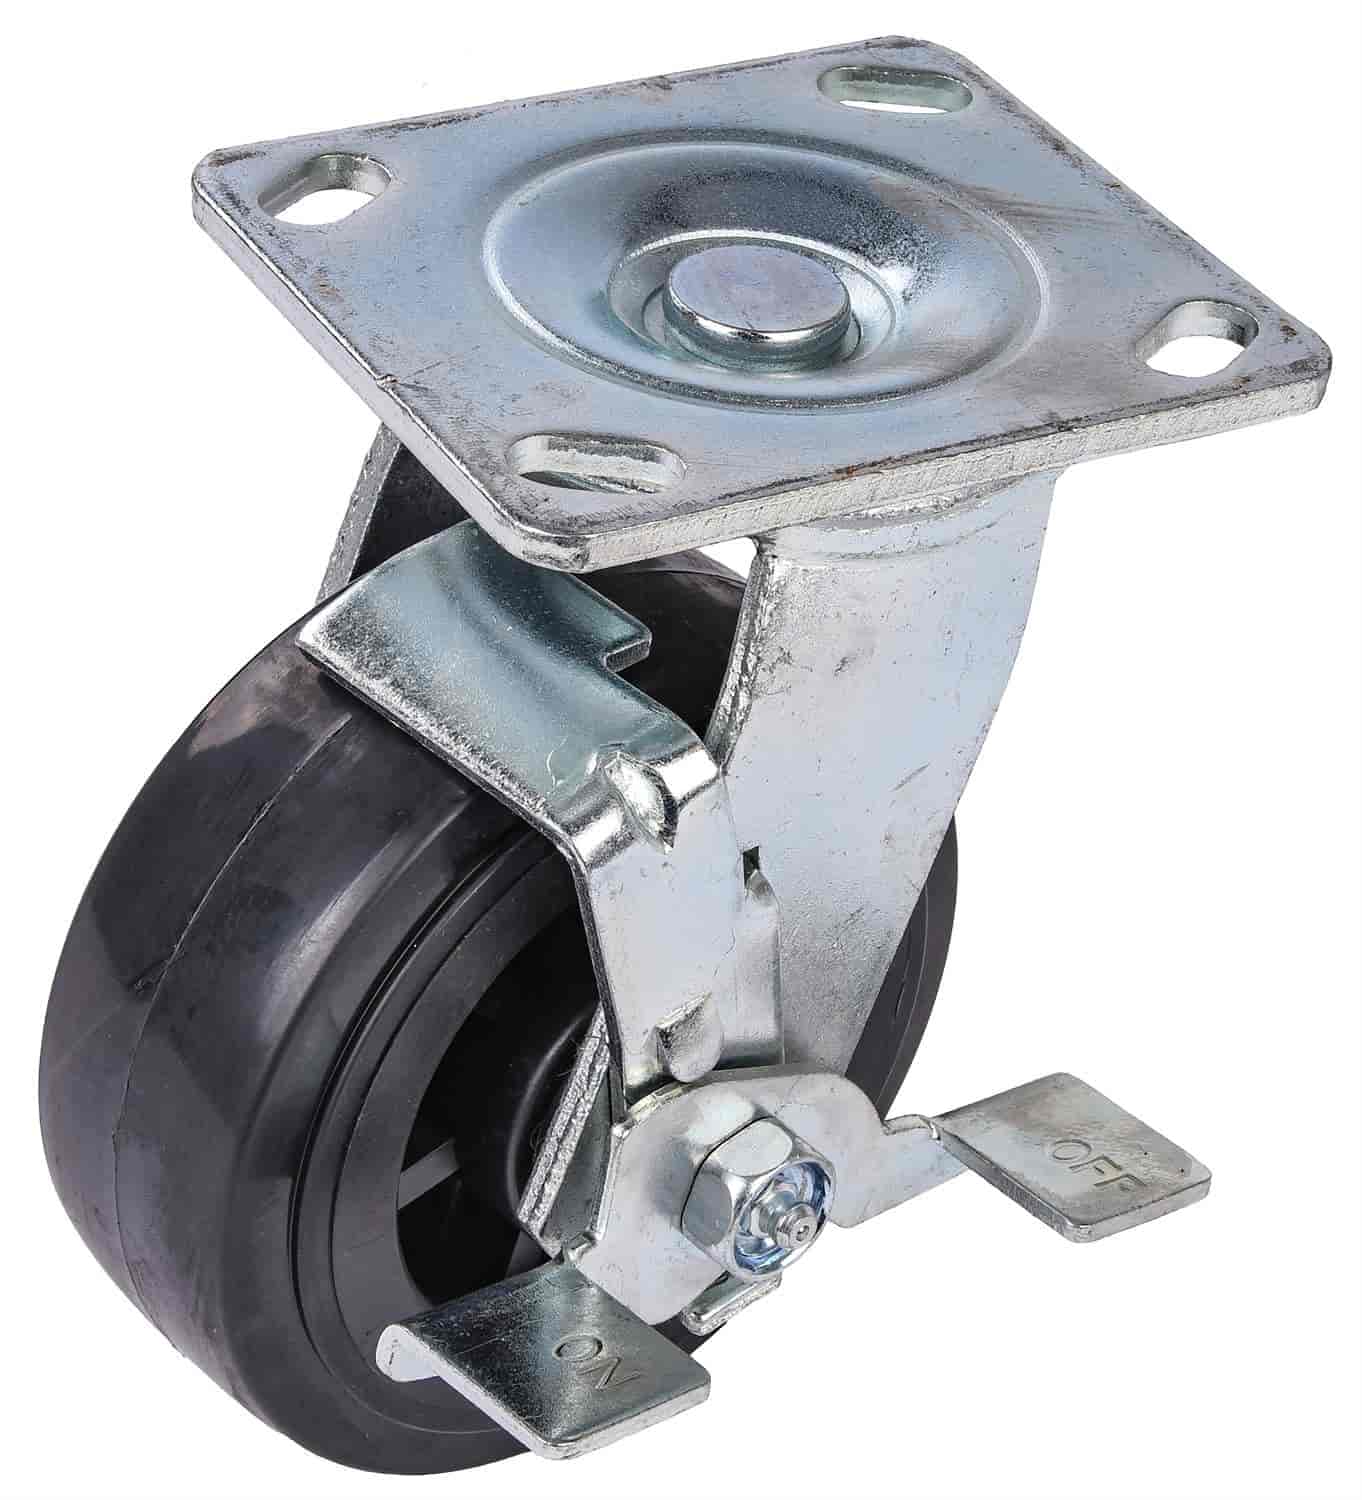 Replacement Swivel Caster Wheel Fits JEGS Adjustable Height